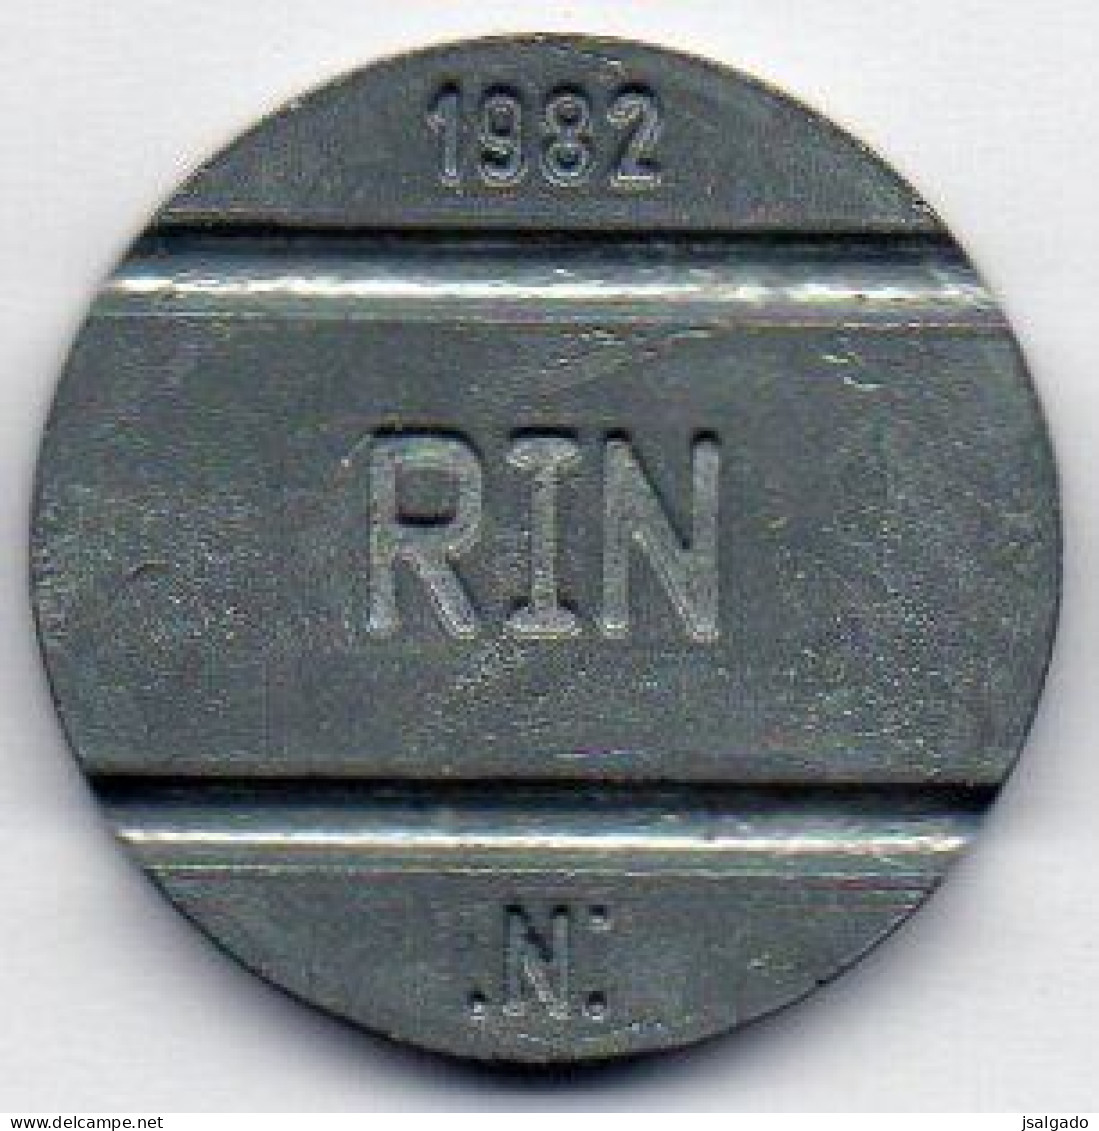 Perú  Telephone Token    1982  (g)  RIN  (g)  .N:   With Three Dots   /  CPTSA  (g)  Telephone In Circle - Noodgeld